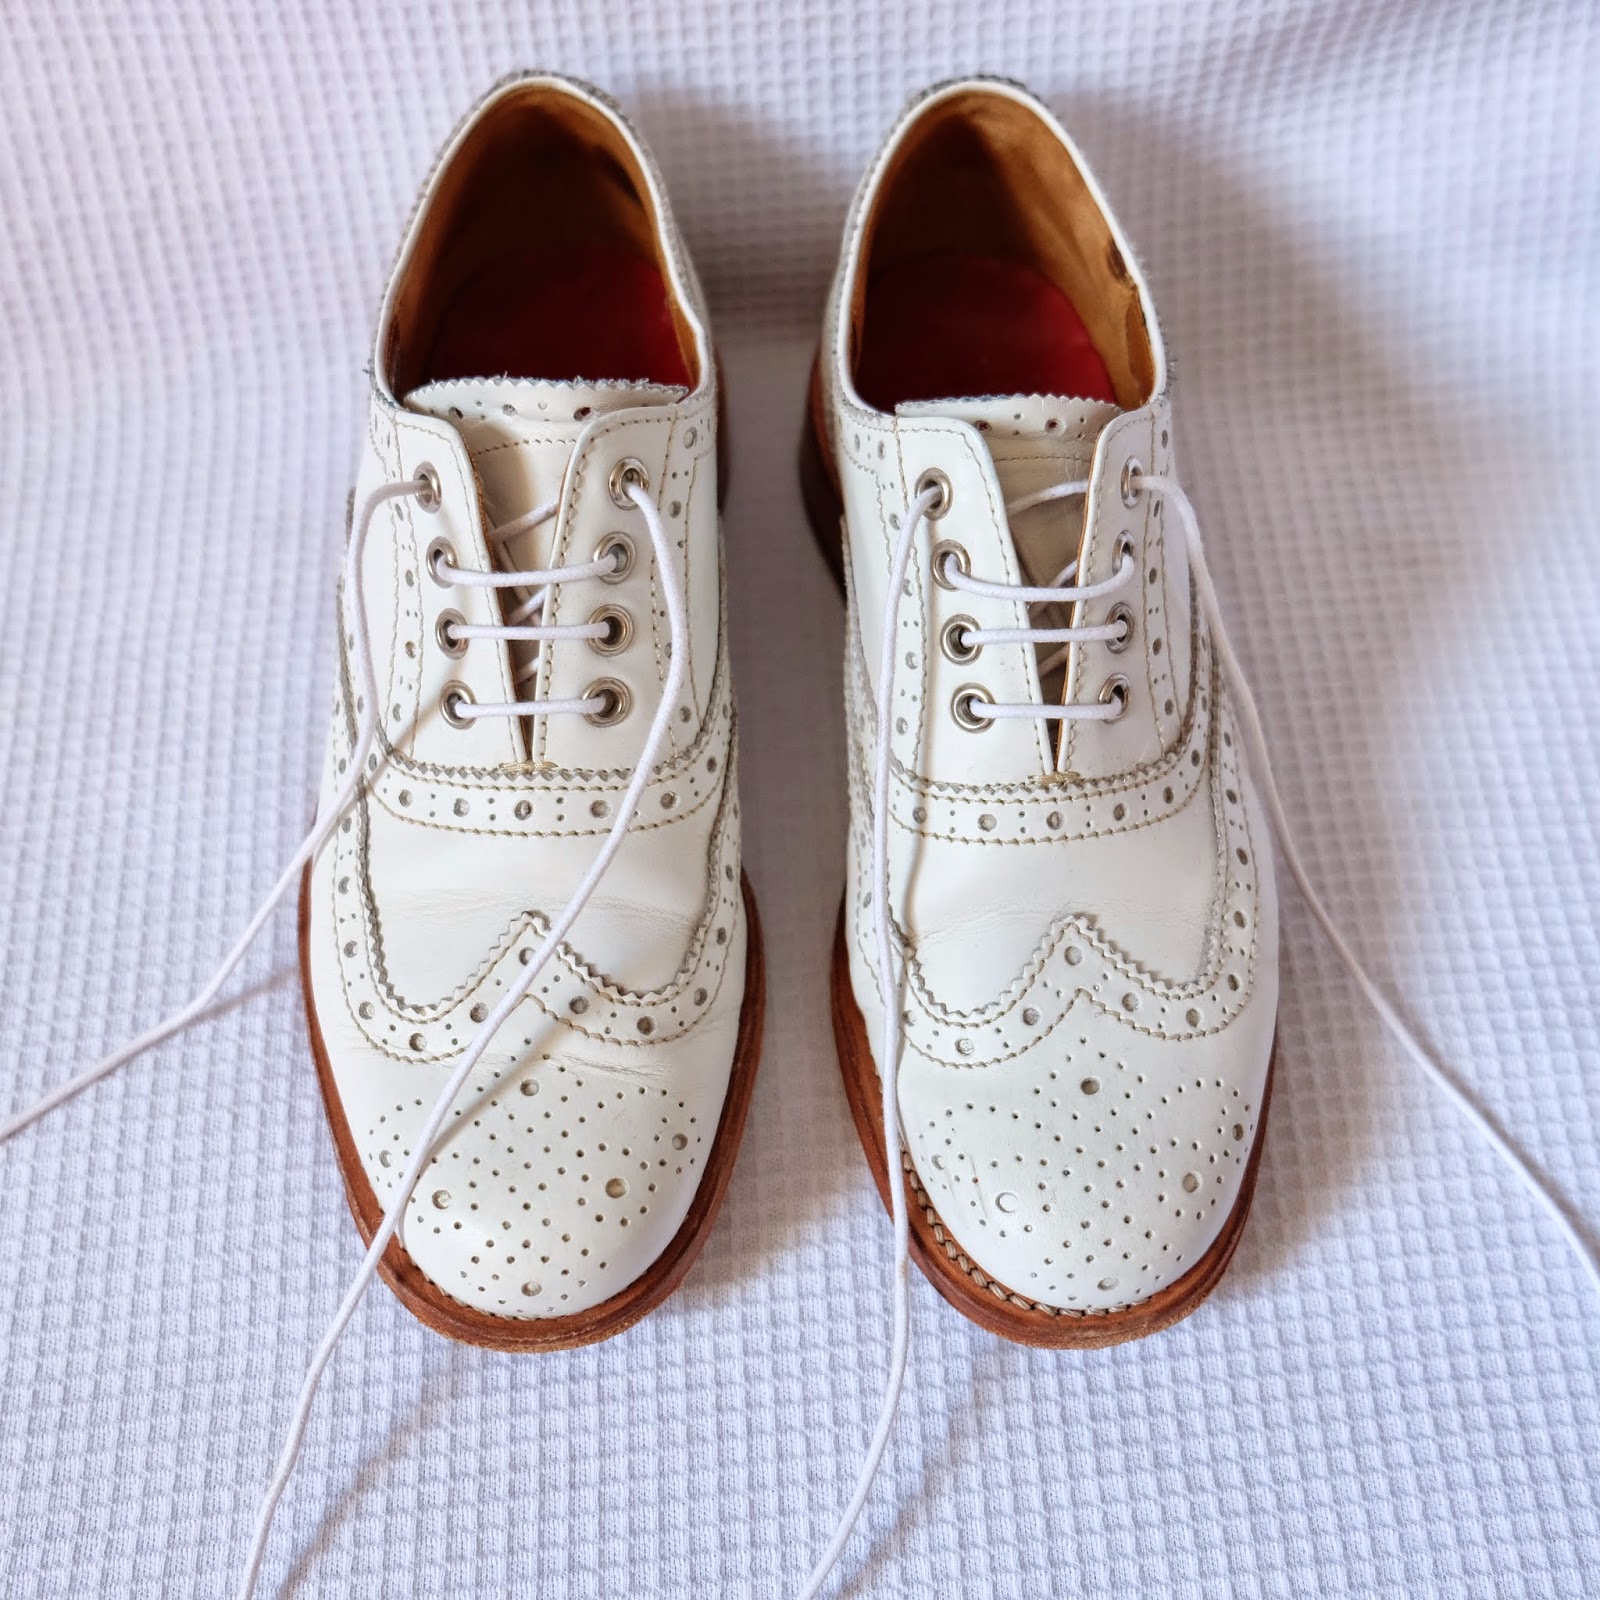 Project Everest: The Grenson Rose Brogue